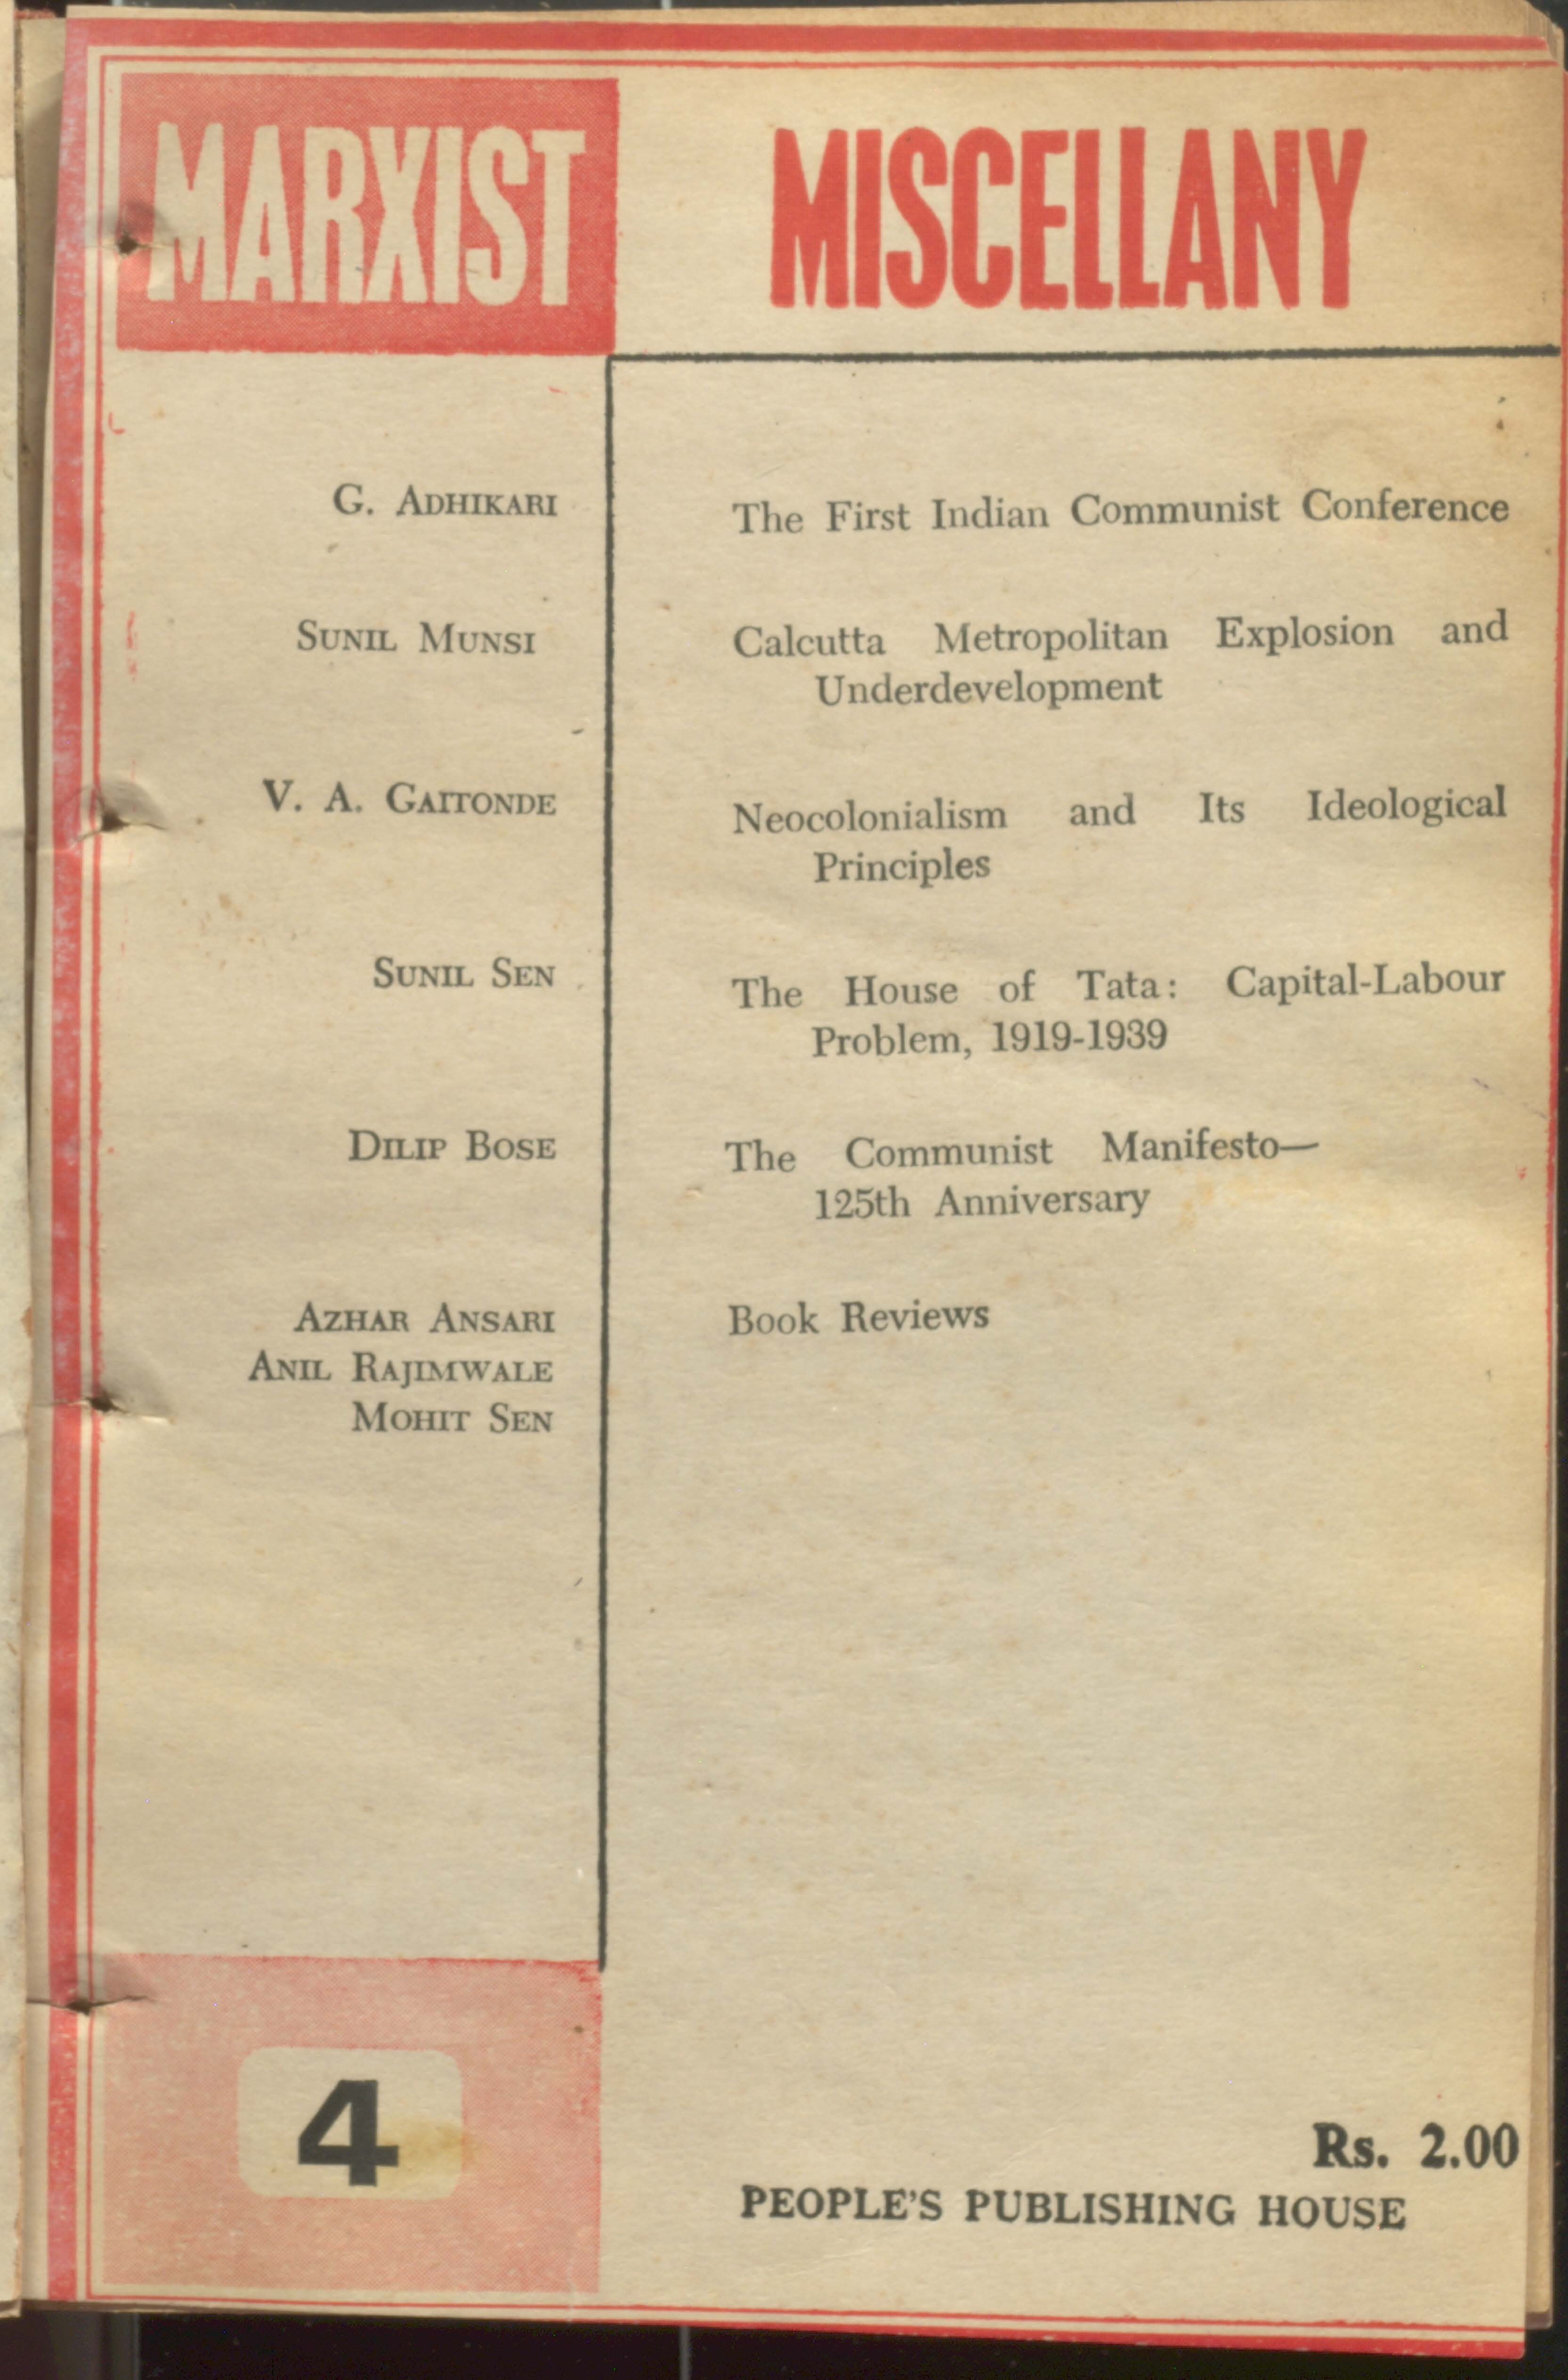 marxist miscellany a collection of essays (4)